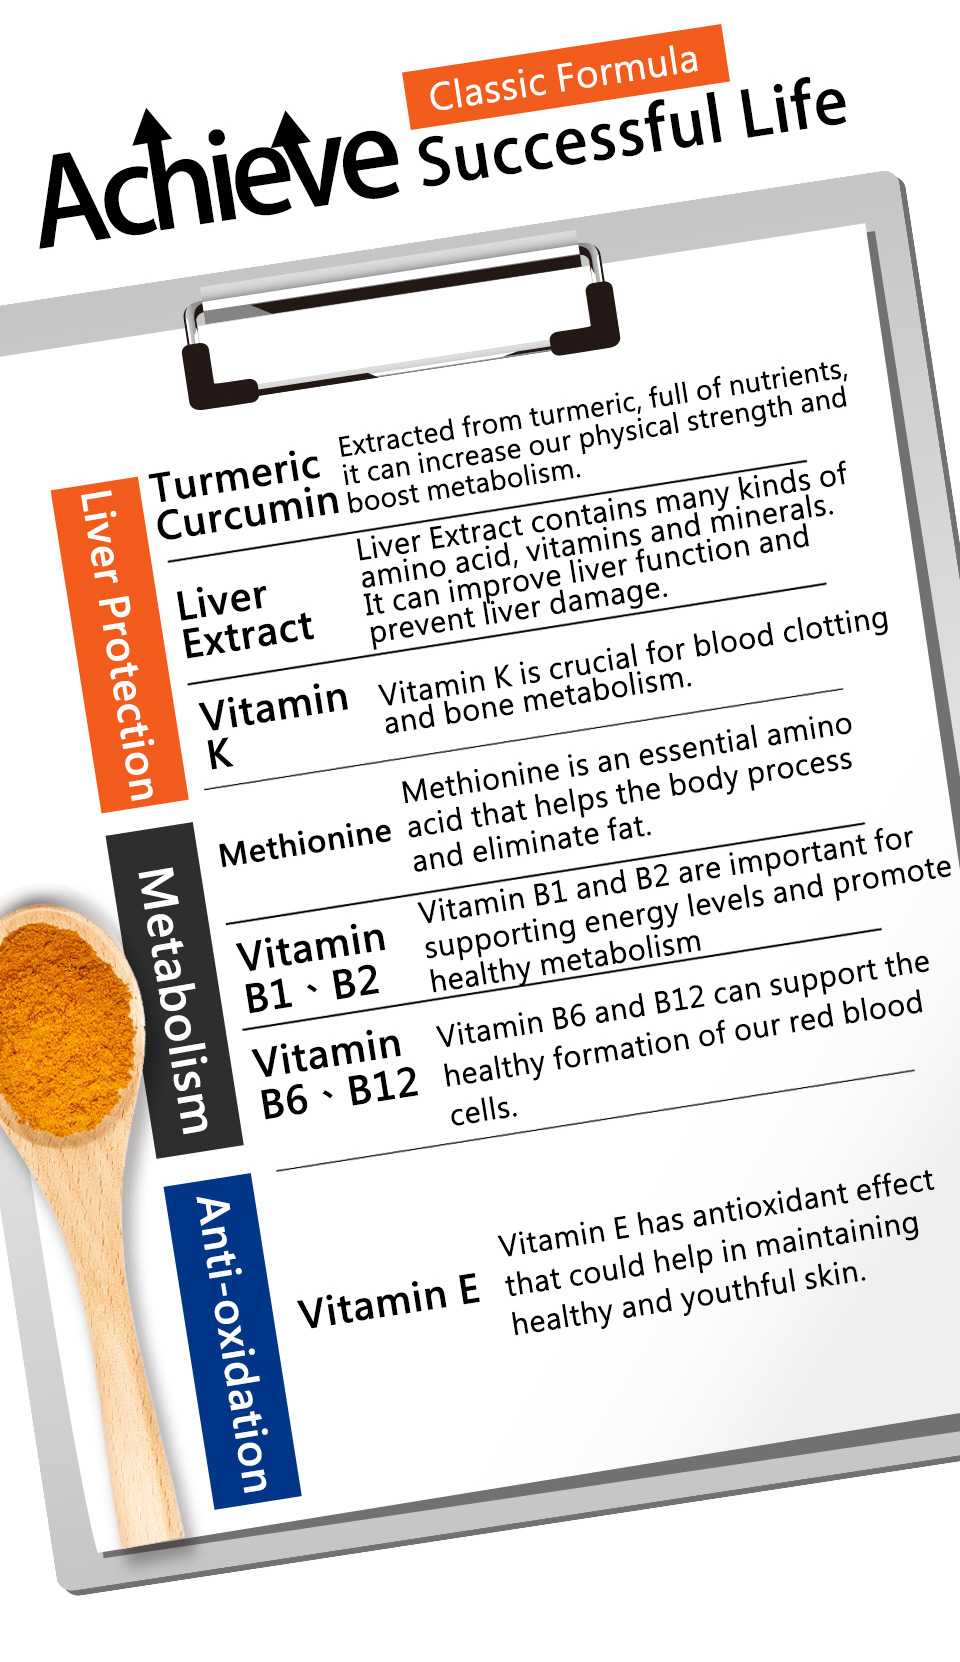 UNIQMAN Turmeric Curcumin increases physical strength and boost metabolism